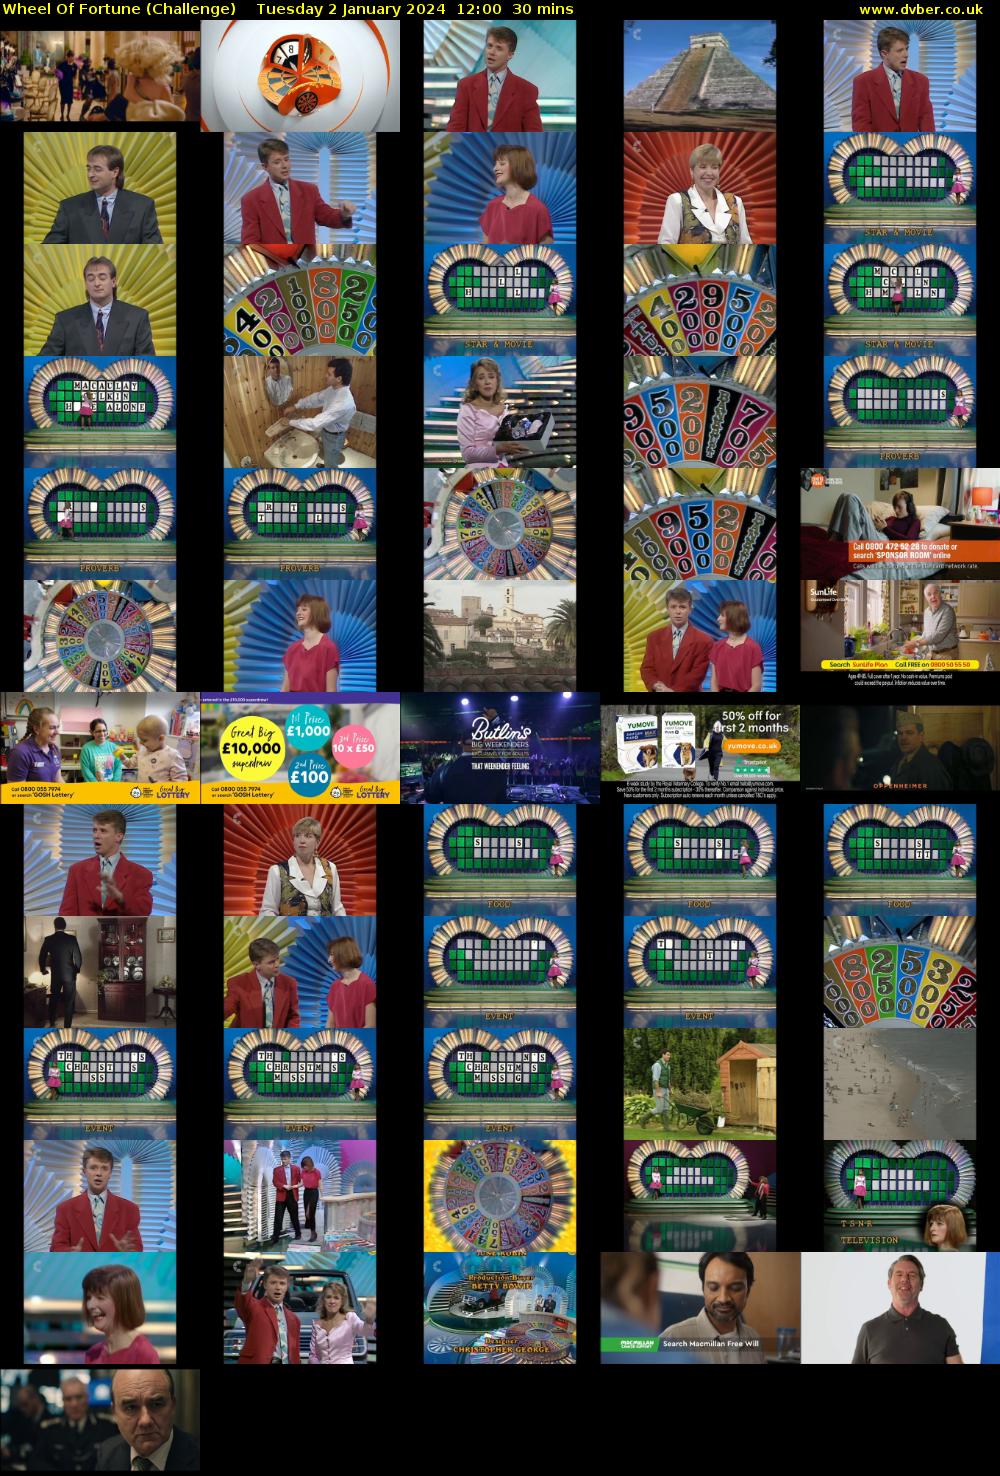 Wheel Of Fortune (Challenge) Tuesday 2 January 2024 12:00 - 12:30